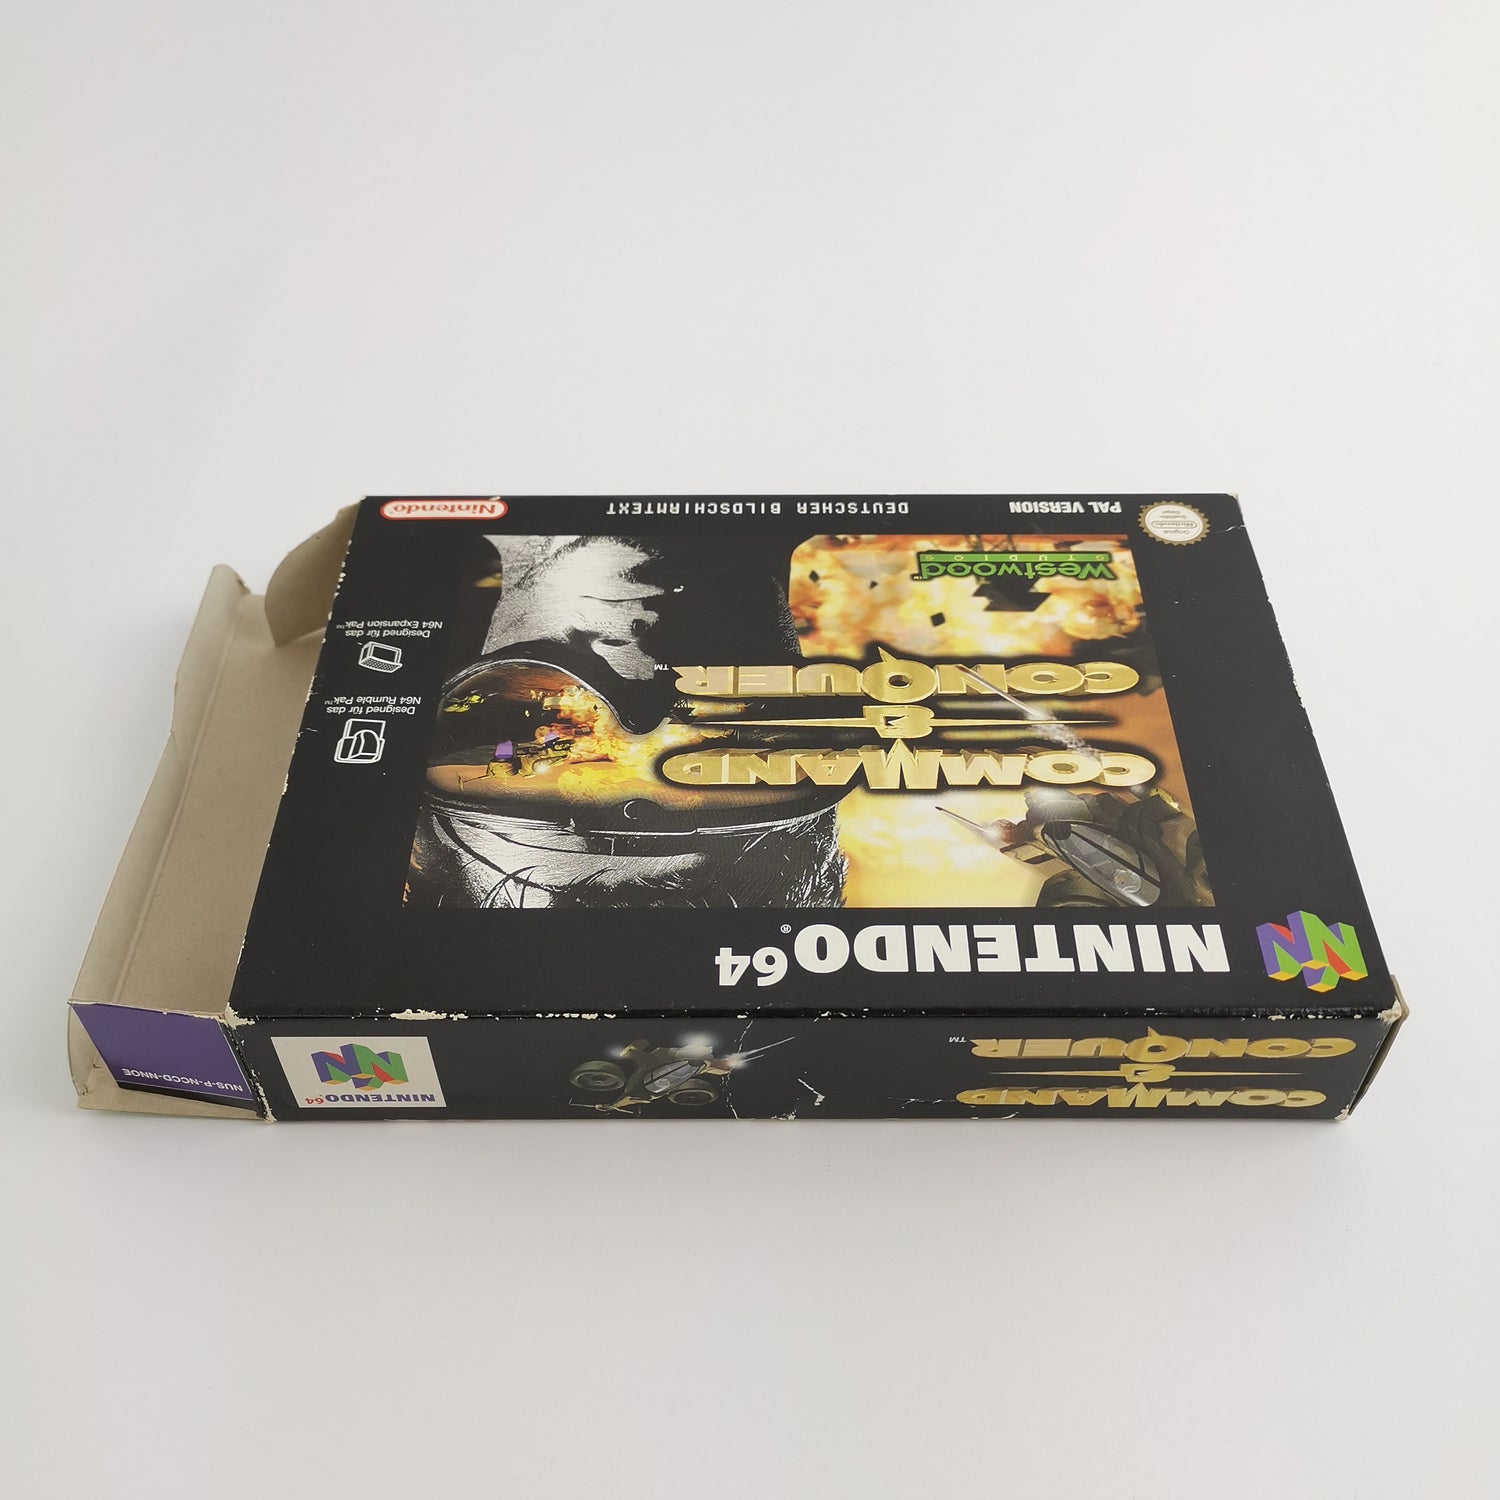 Nintendo 64 Game: Command & Conquer | N64 Game - OVP PAL